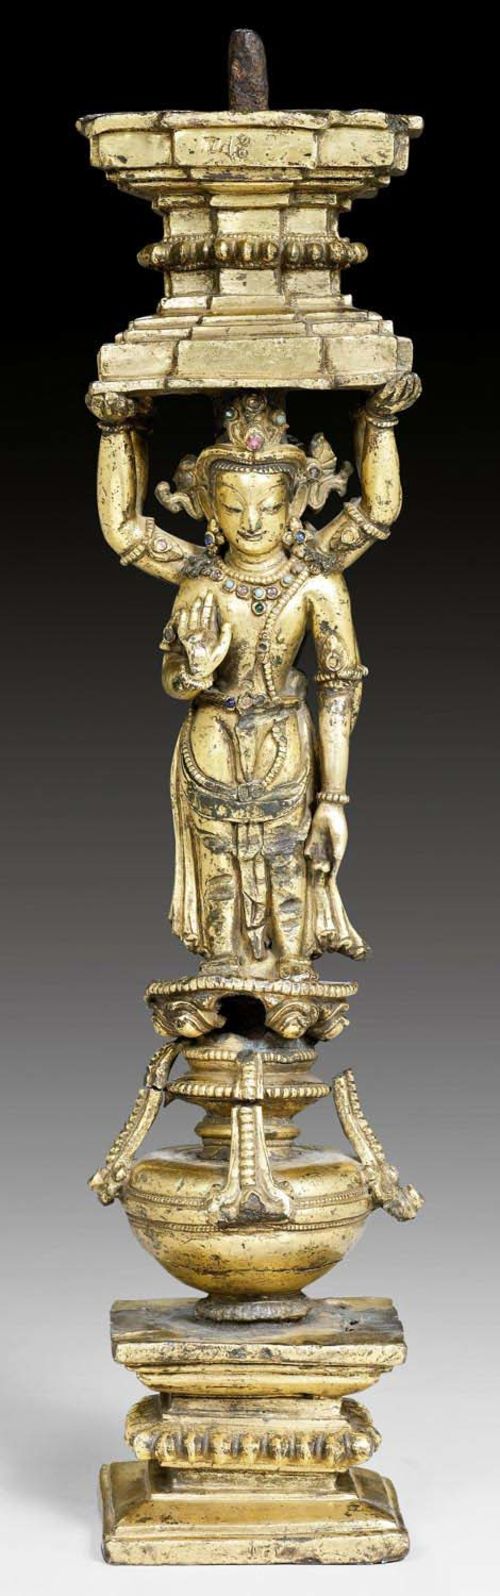 A GILT BRONZE SUPPORT WITH TWO STANDING FIGURES. Nepalese work in Tibet, 14/15th c. Height 34.5 cm. Possibly from Densatil Monastery. Slightly damaged.